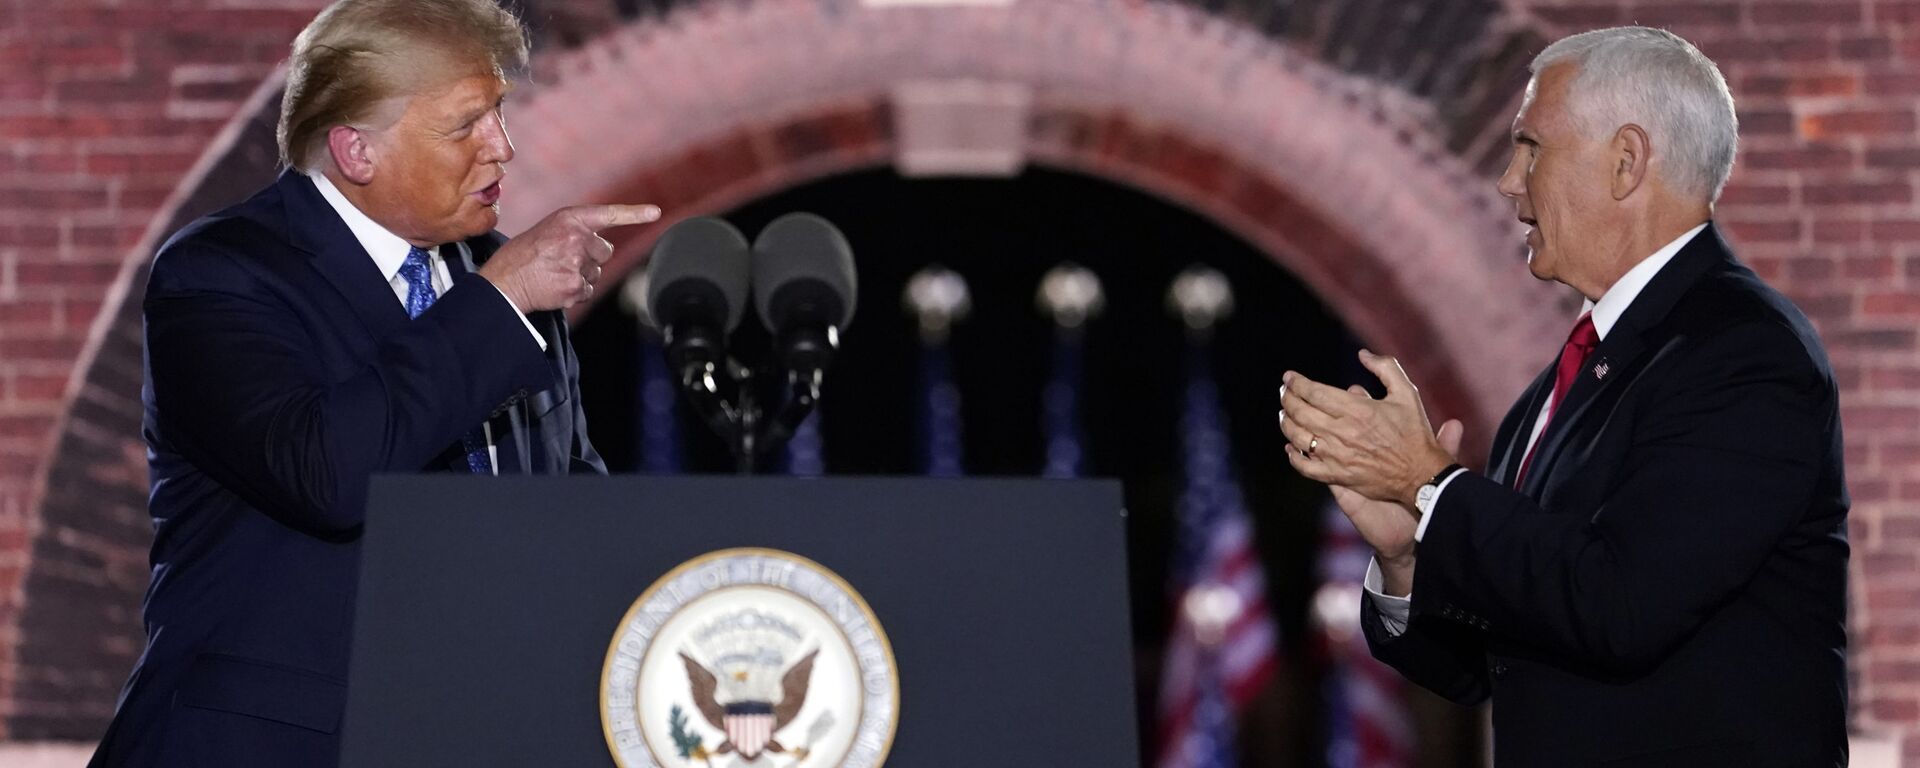 President Donald Trump joins Vice President Mike Pence on stage after Pence spoke on the third day of the Republican National Convention at Fort McHenry National Monument and Historic Shrine in Baltimore, Wednesday, Aug. 26, 2020 - Sputnik International, 1920, 06.06.2021